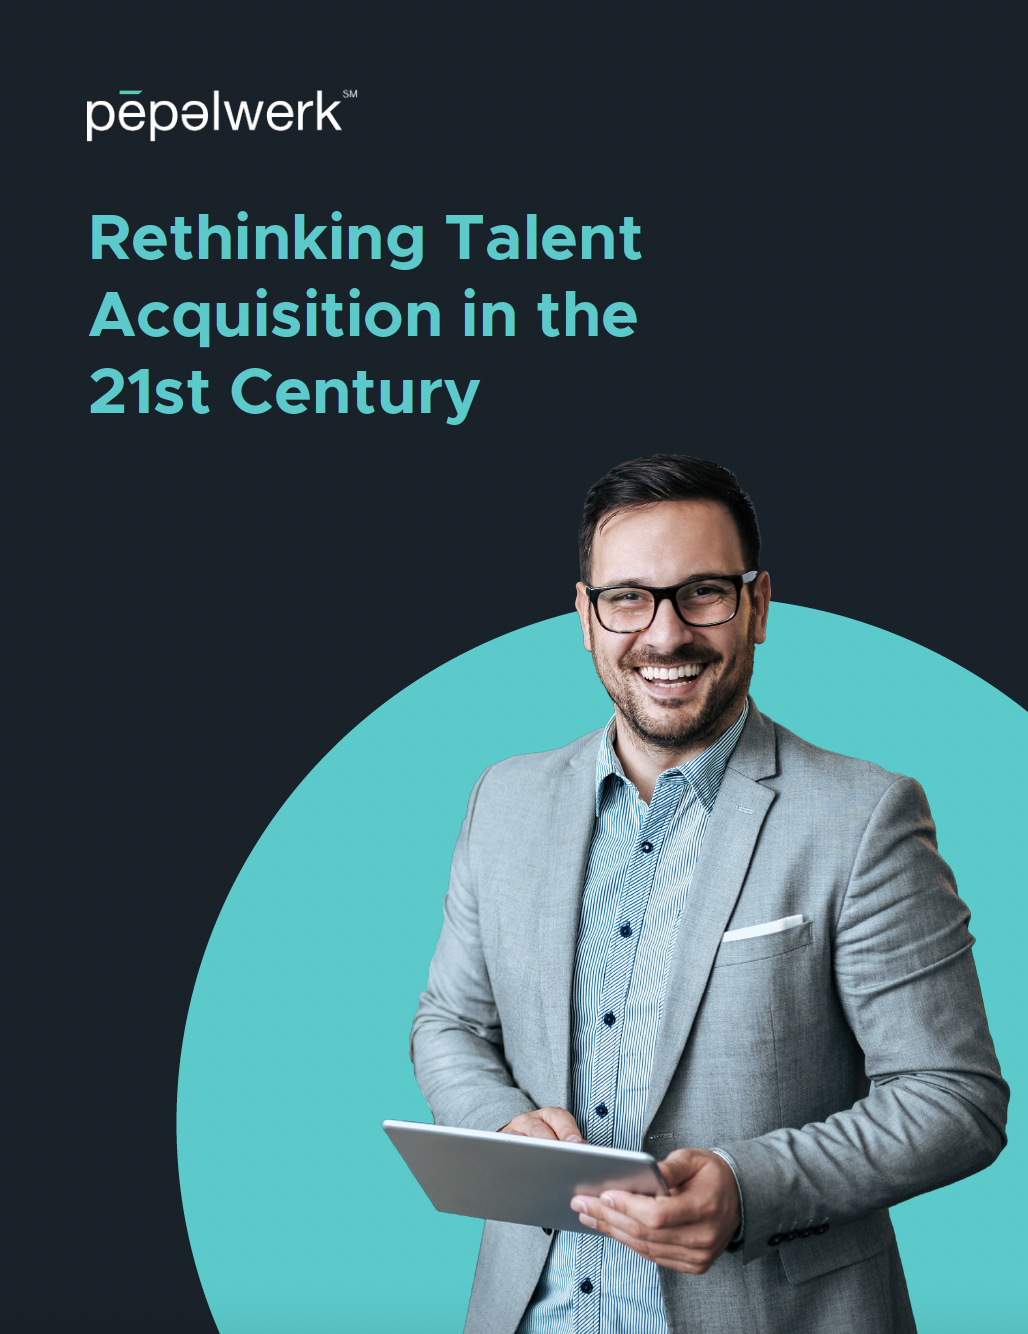 Rethinking talent acquisition in the 21st century